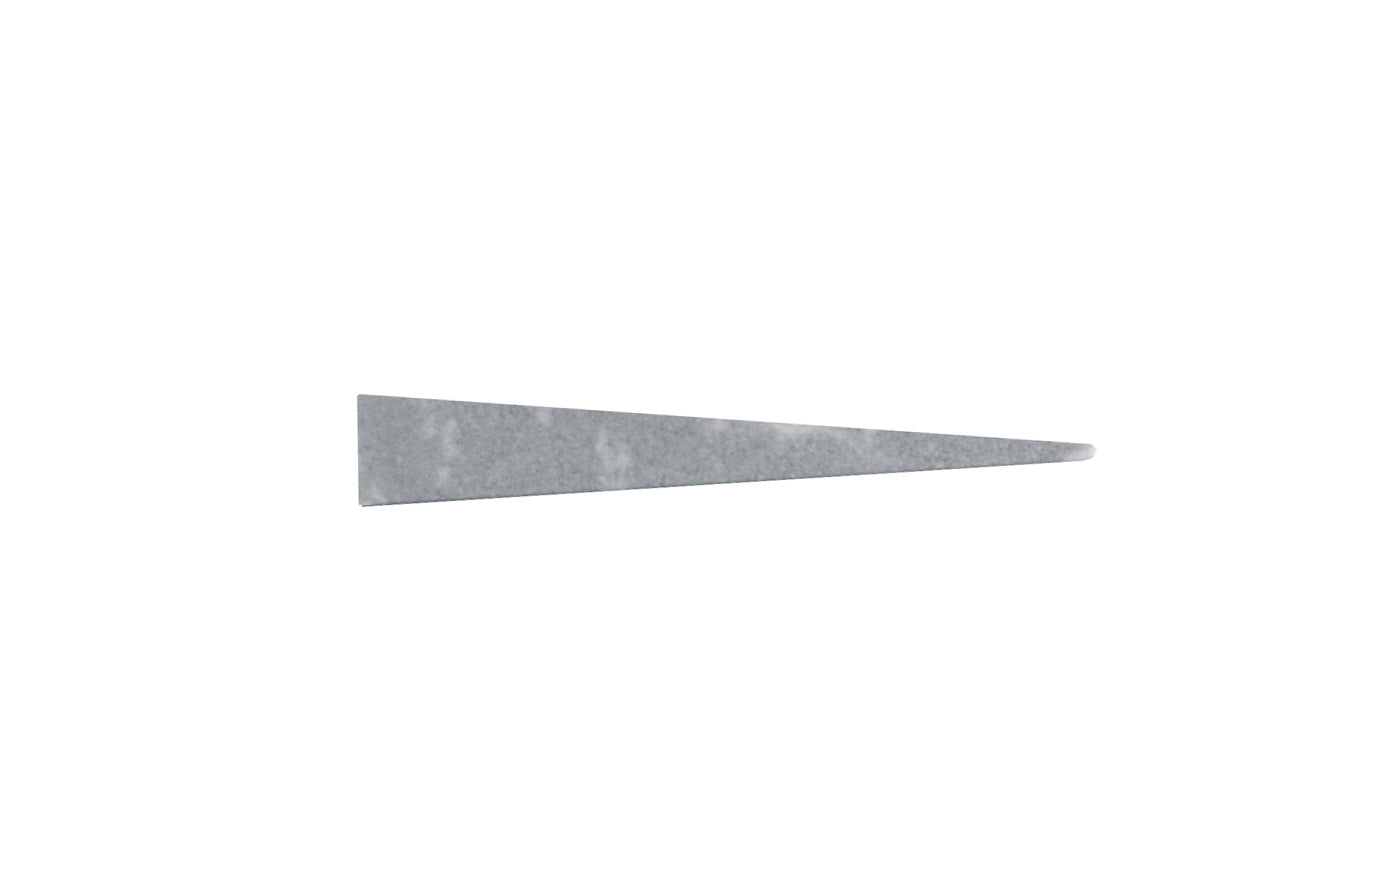 Hard Select Arkansas Knife File Stone ~ 3" x 3/4" x 1/8". This Norton Hard Arkansas Stone is a super-fine stone that is satisfactory for the final edge on woodworking cutting tools & knives. Use a few drops of mineral oil to prevent glazing while sharpening. Norton Model SHF-873 - 85283.